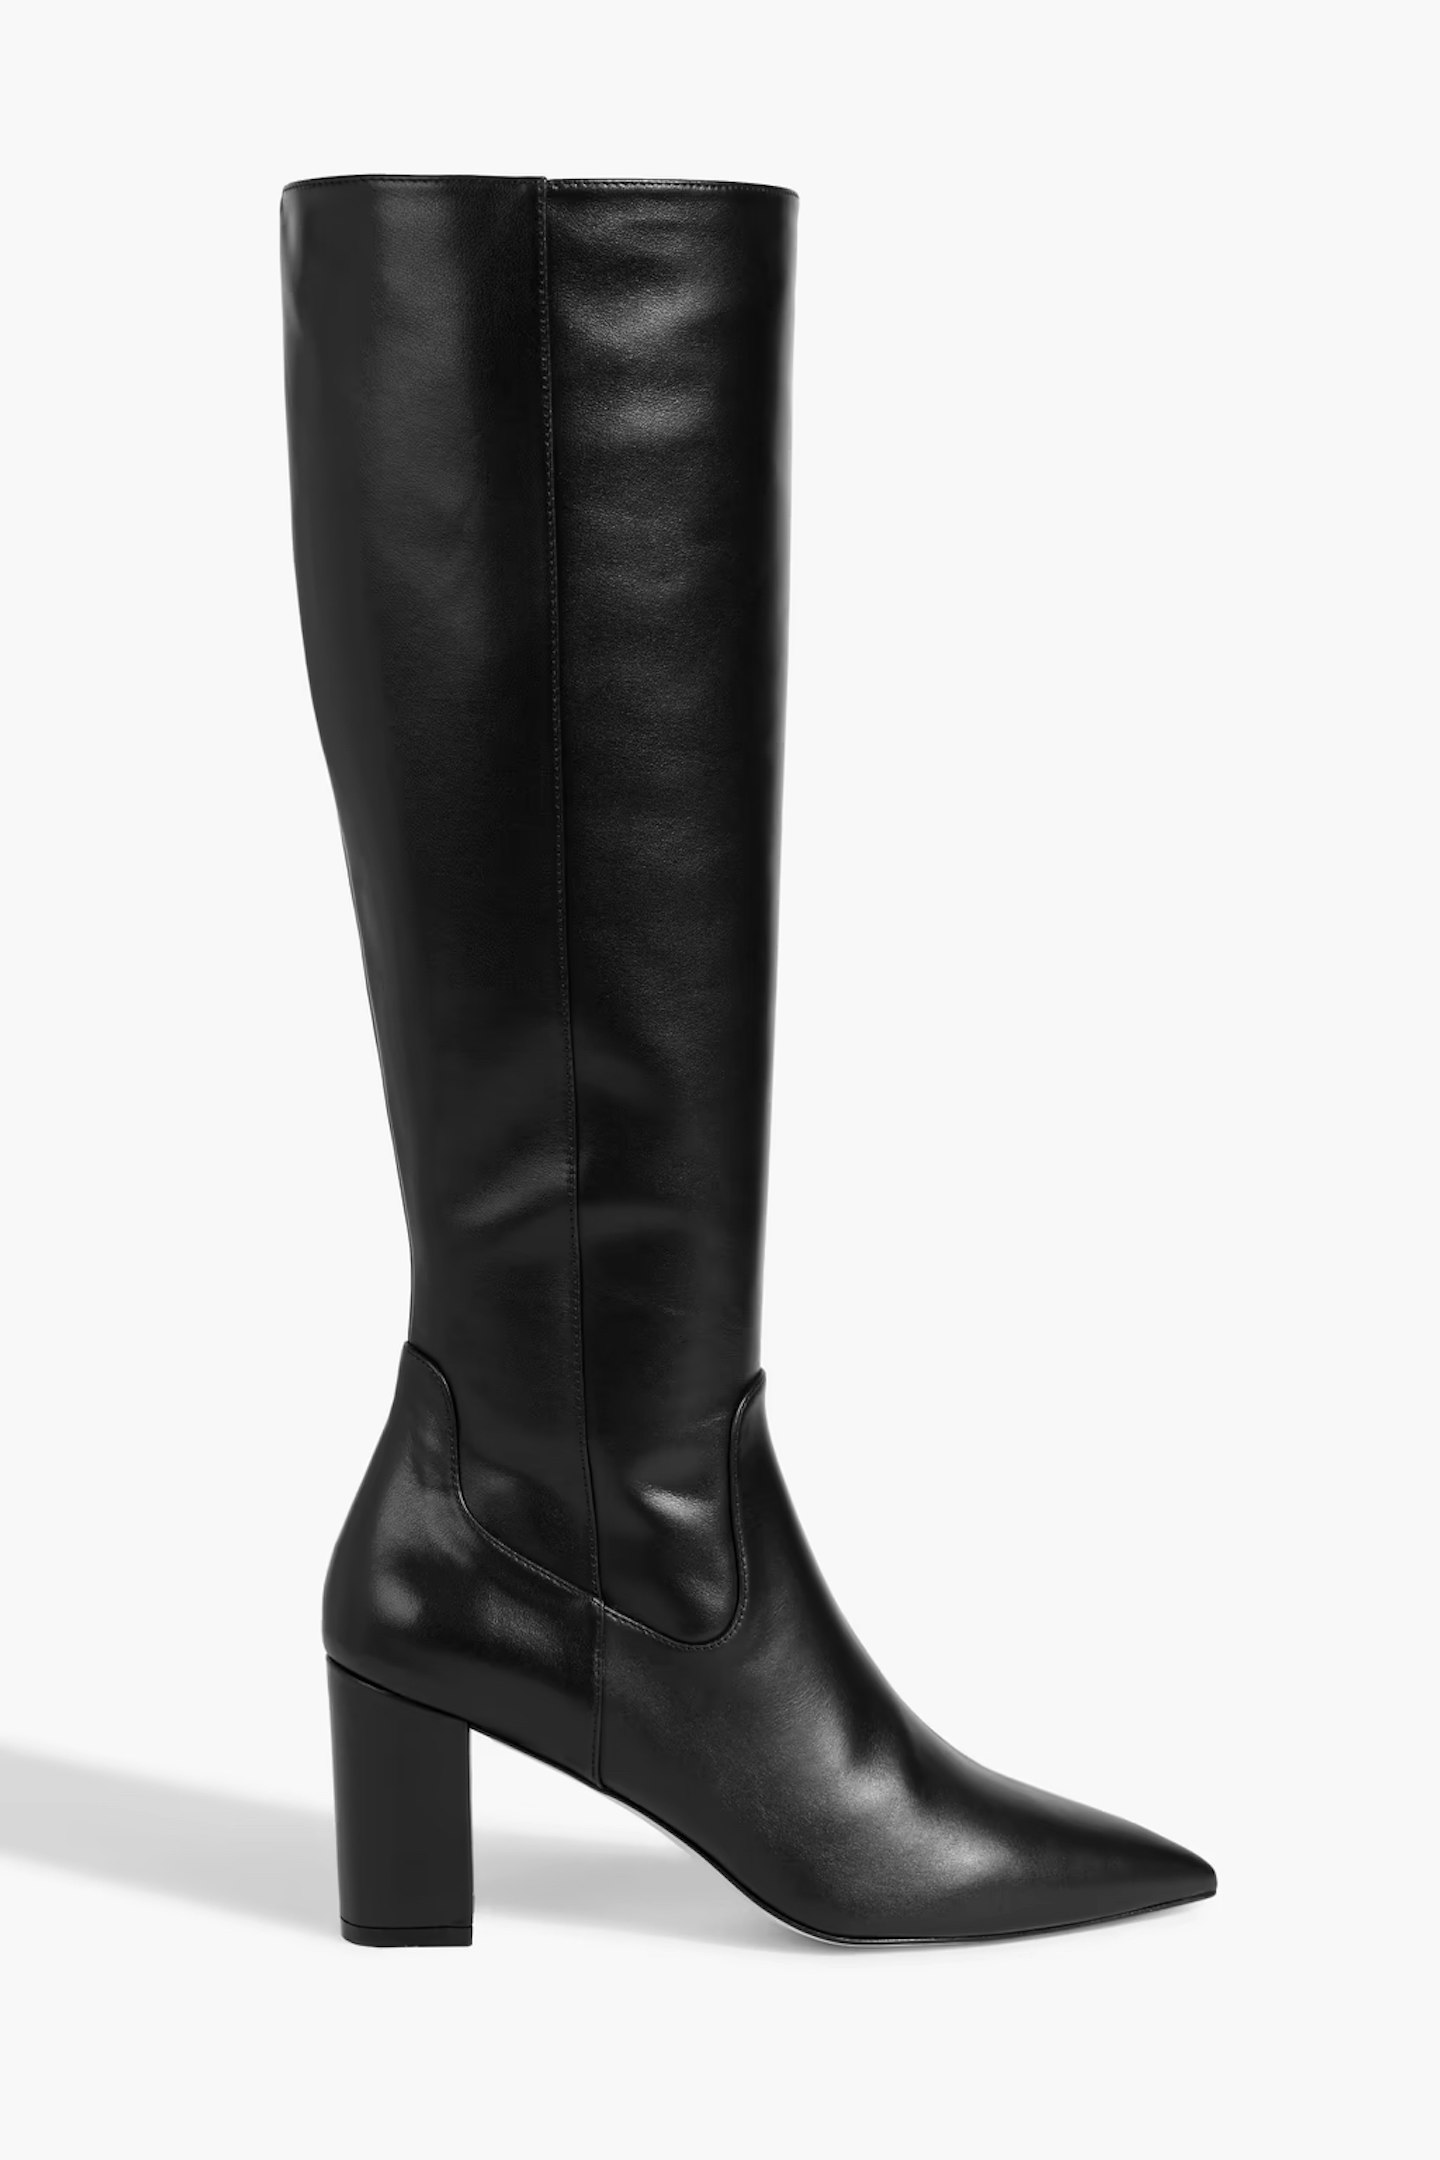 How To Style Knee High Boots 2021, Elegant Fall Outfits 2021